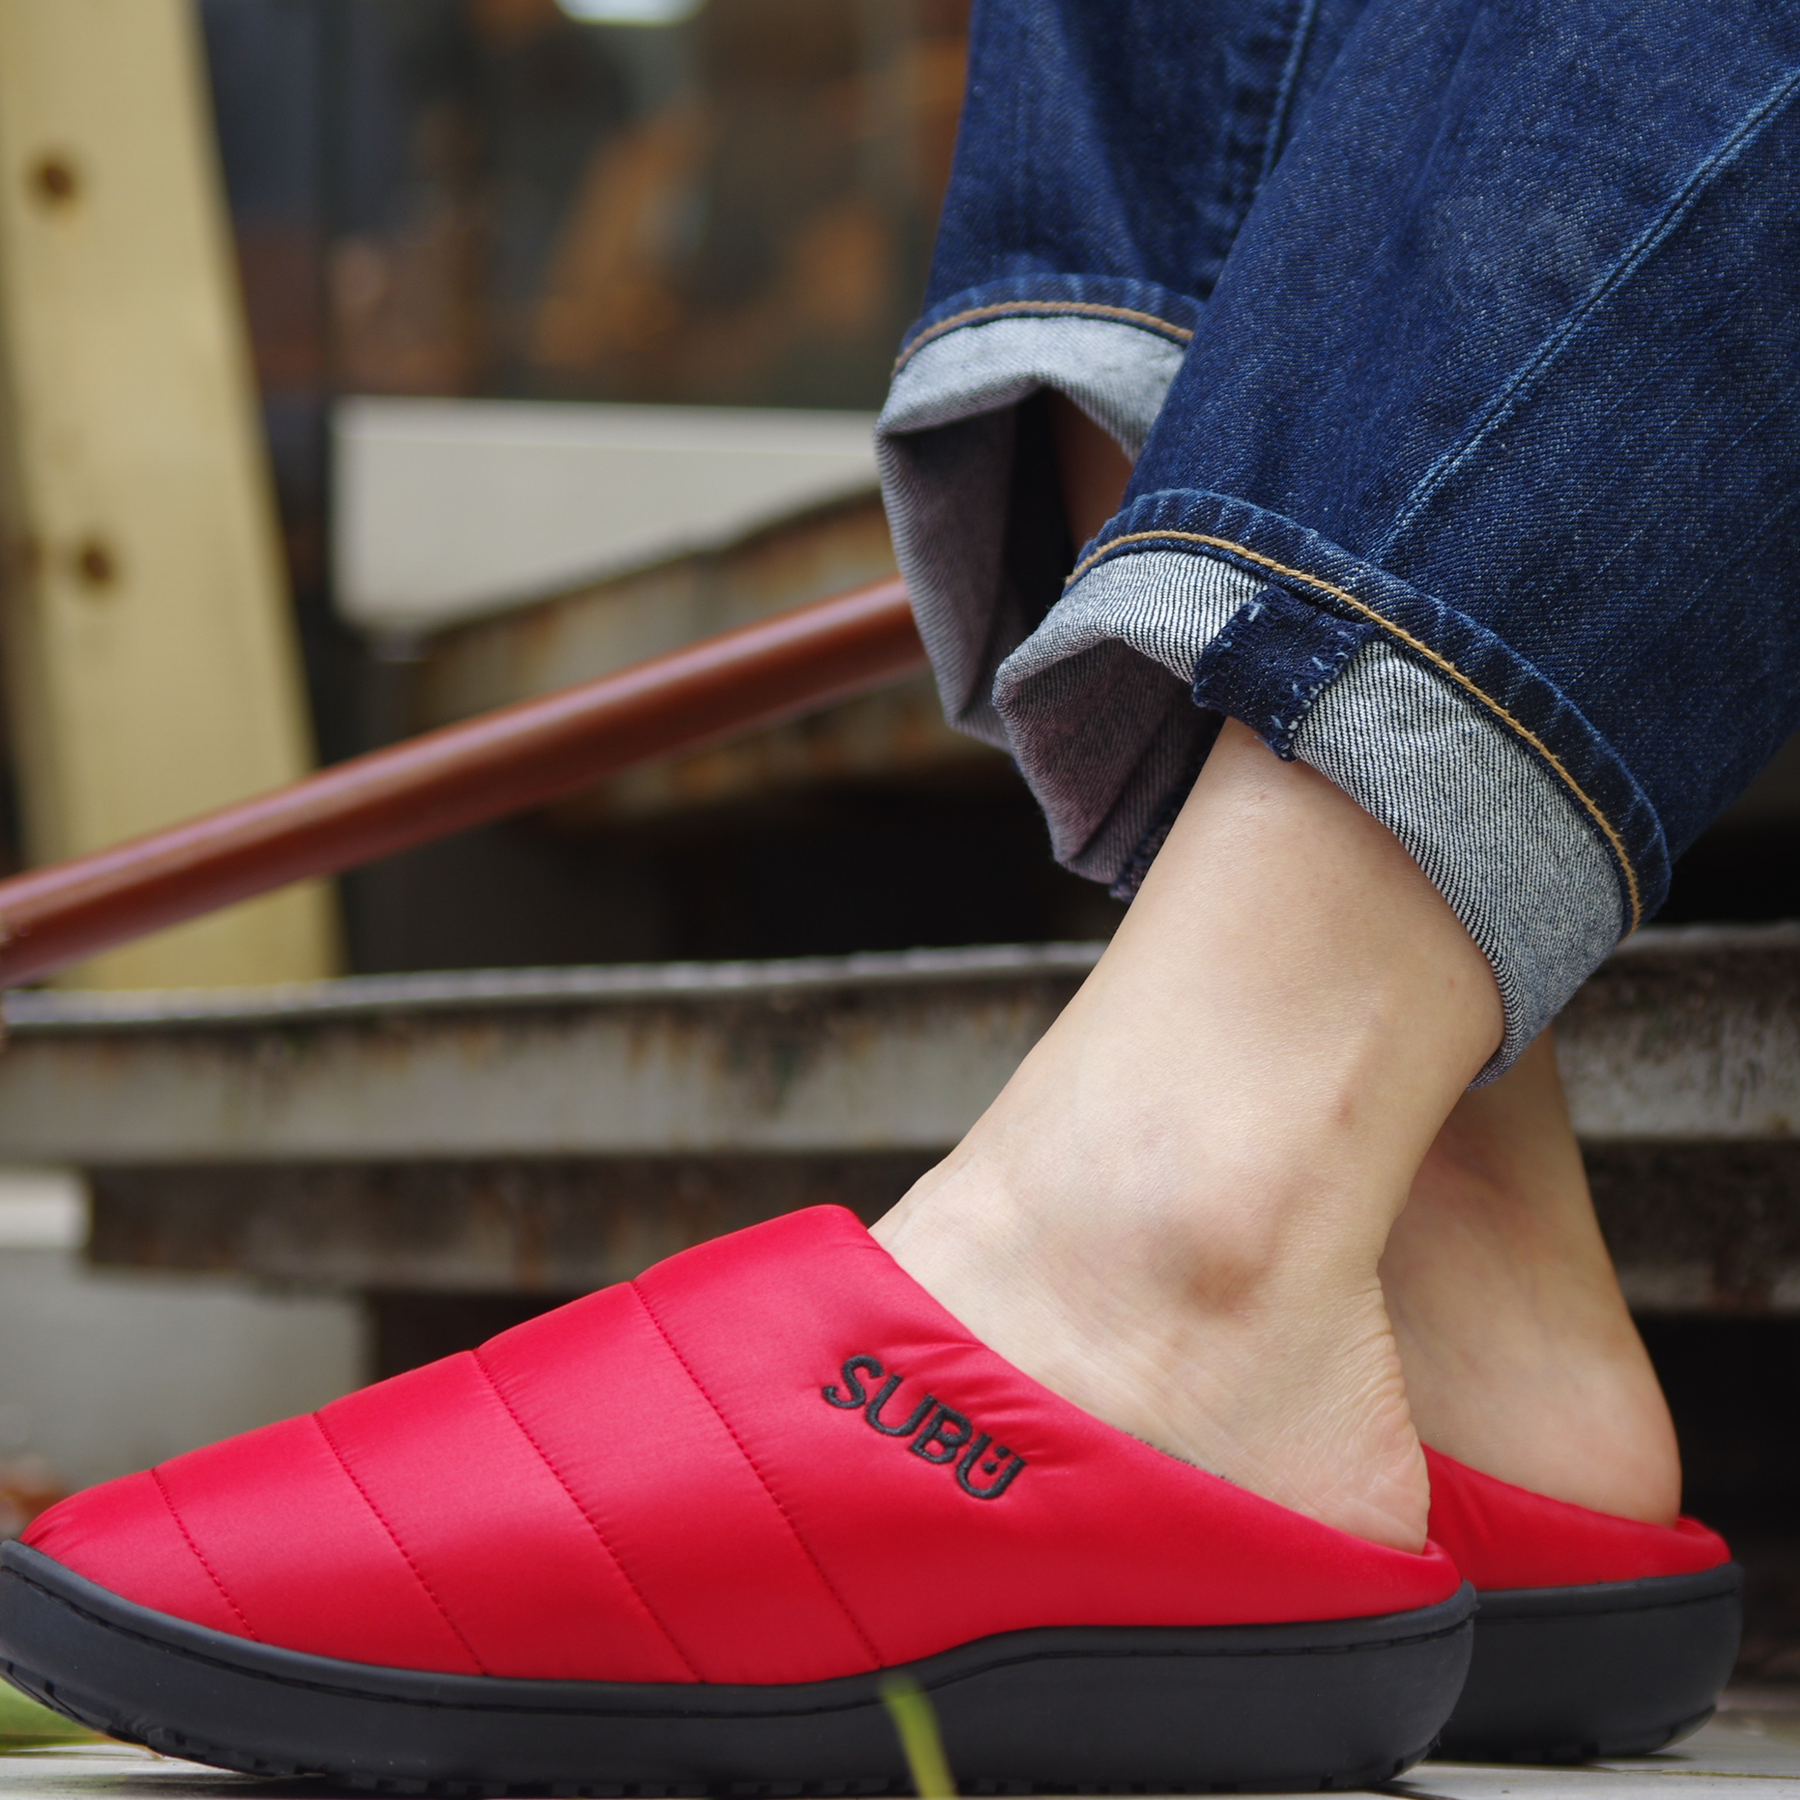 Fall & Winter Slippers - Red